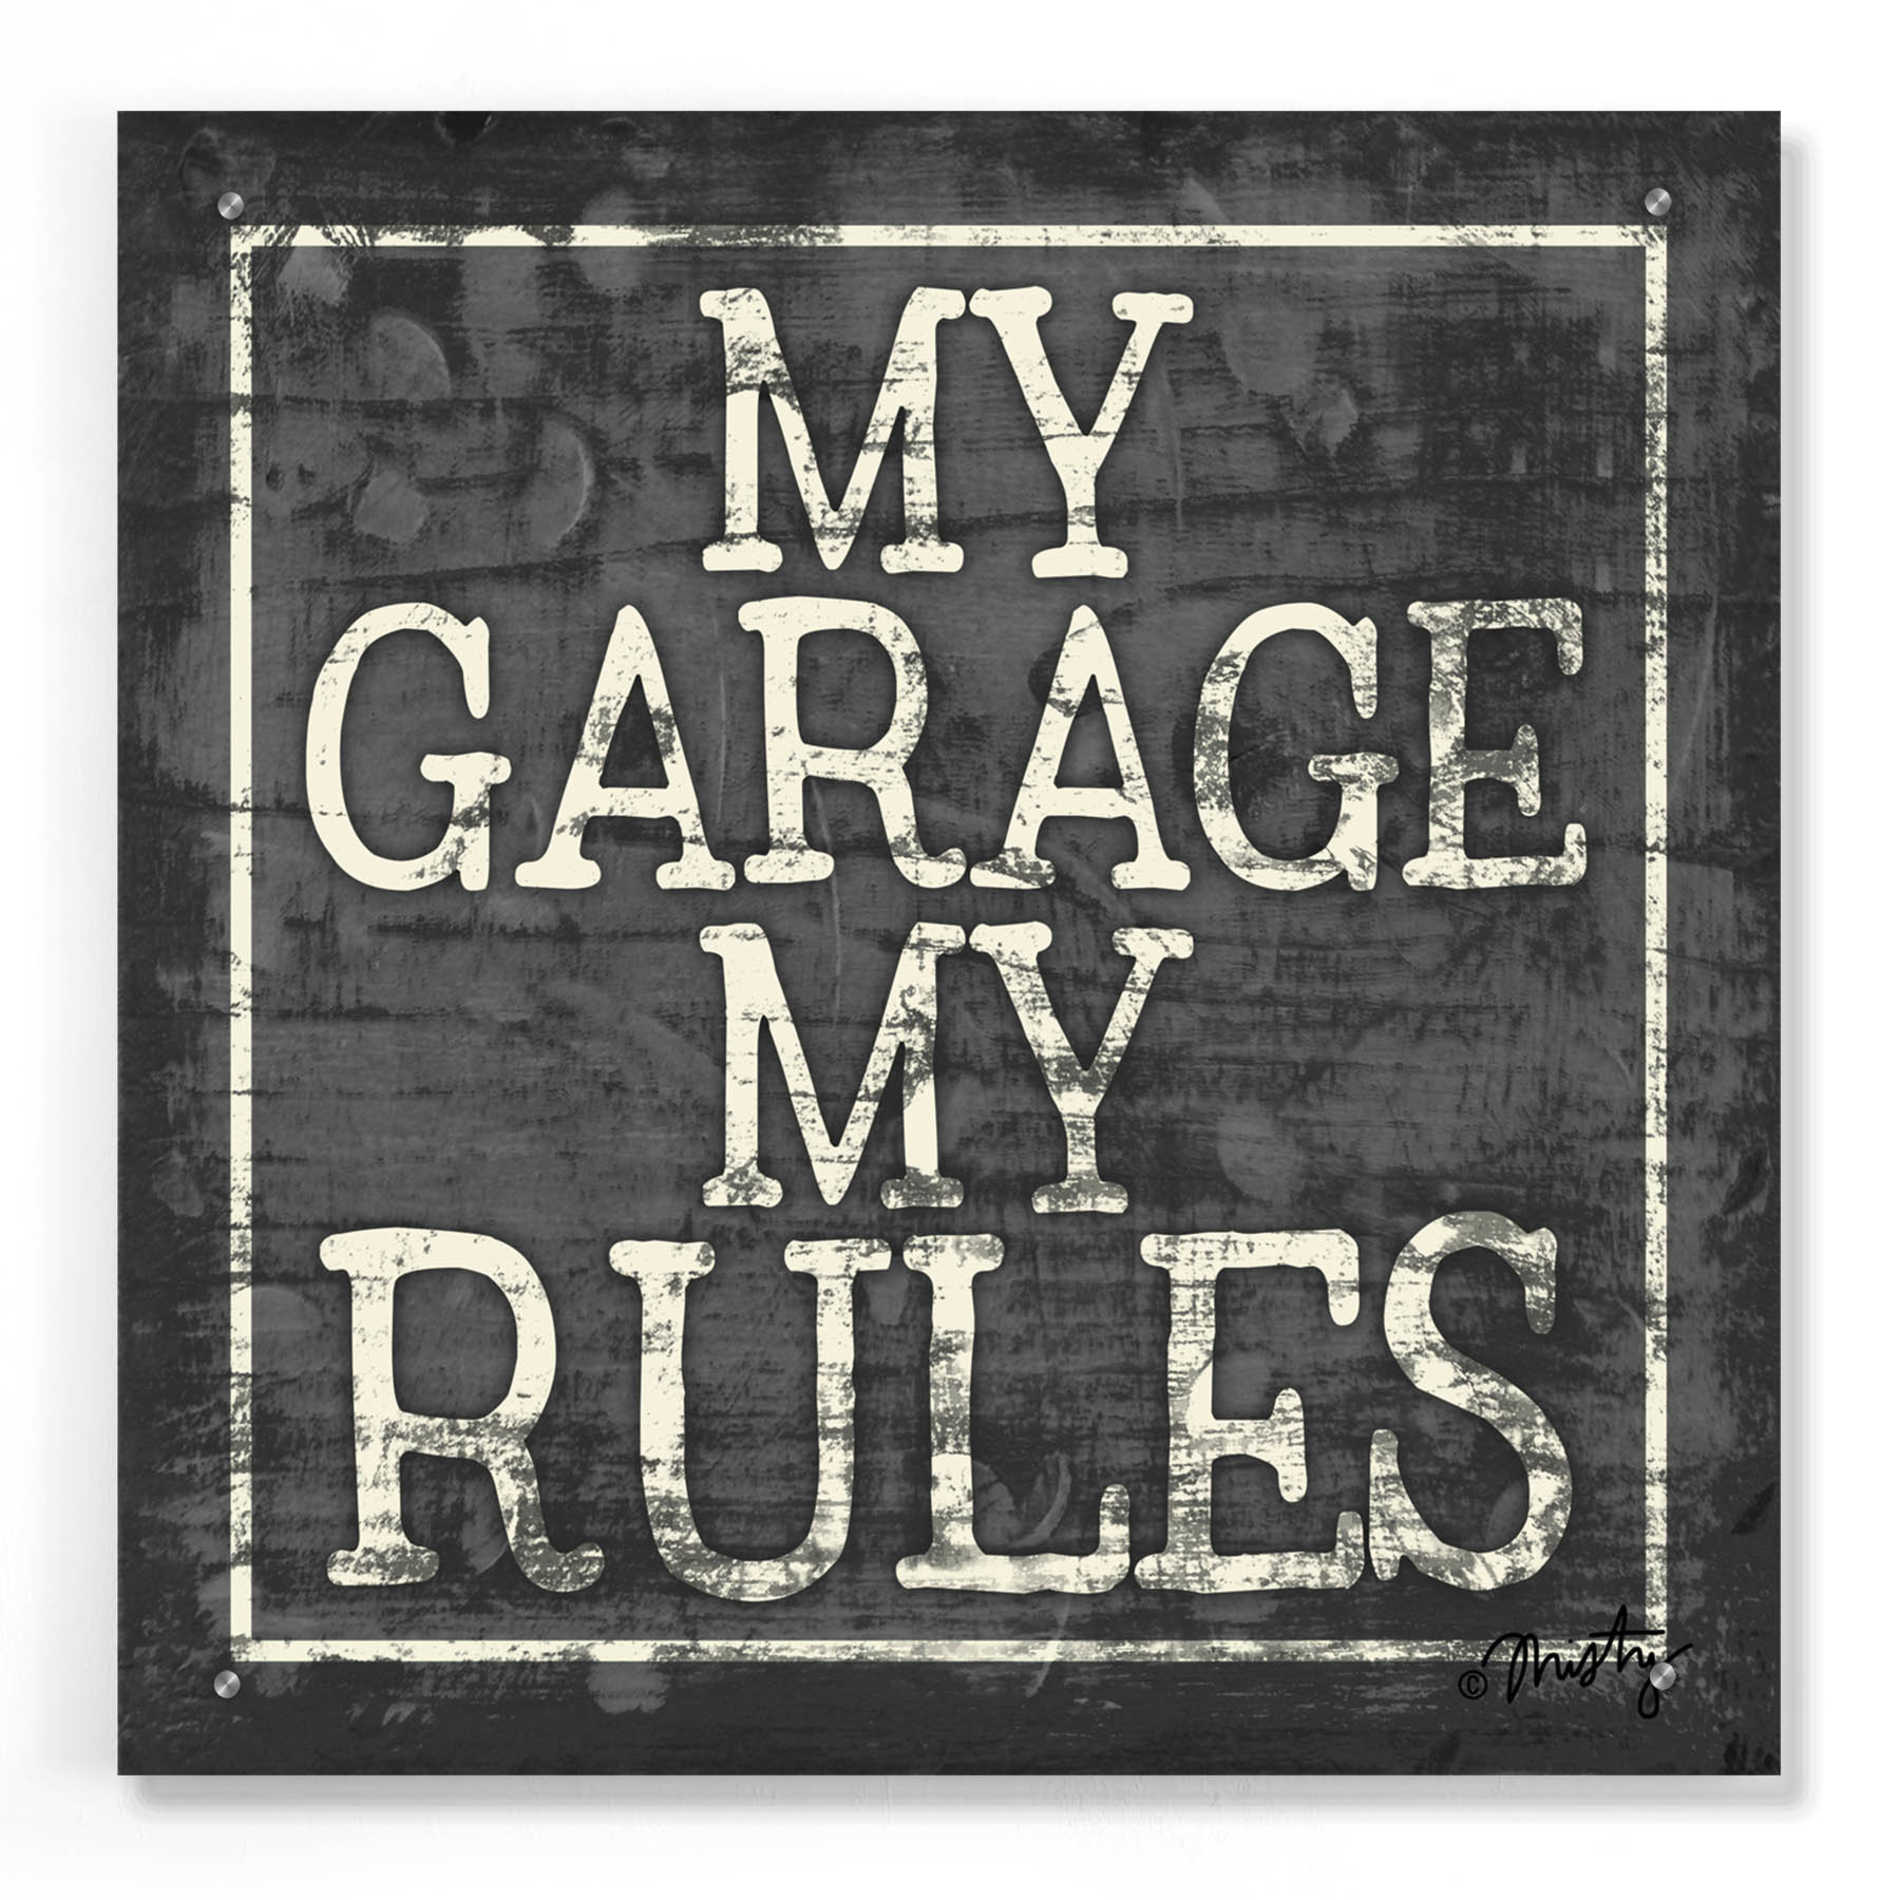 Epic Art 'My Garage, My Rules' by Misty Michelle, Acrylic Glass Wall Art,24x24